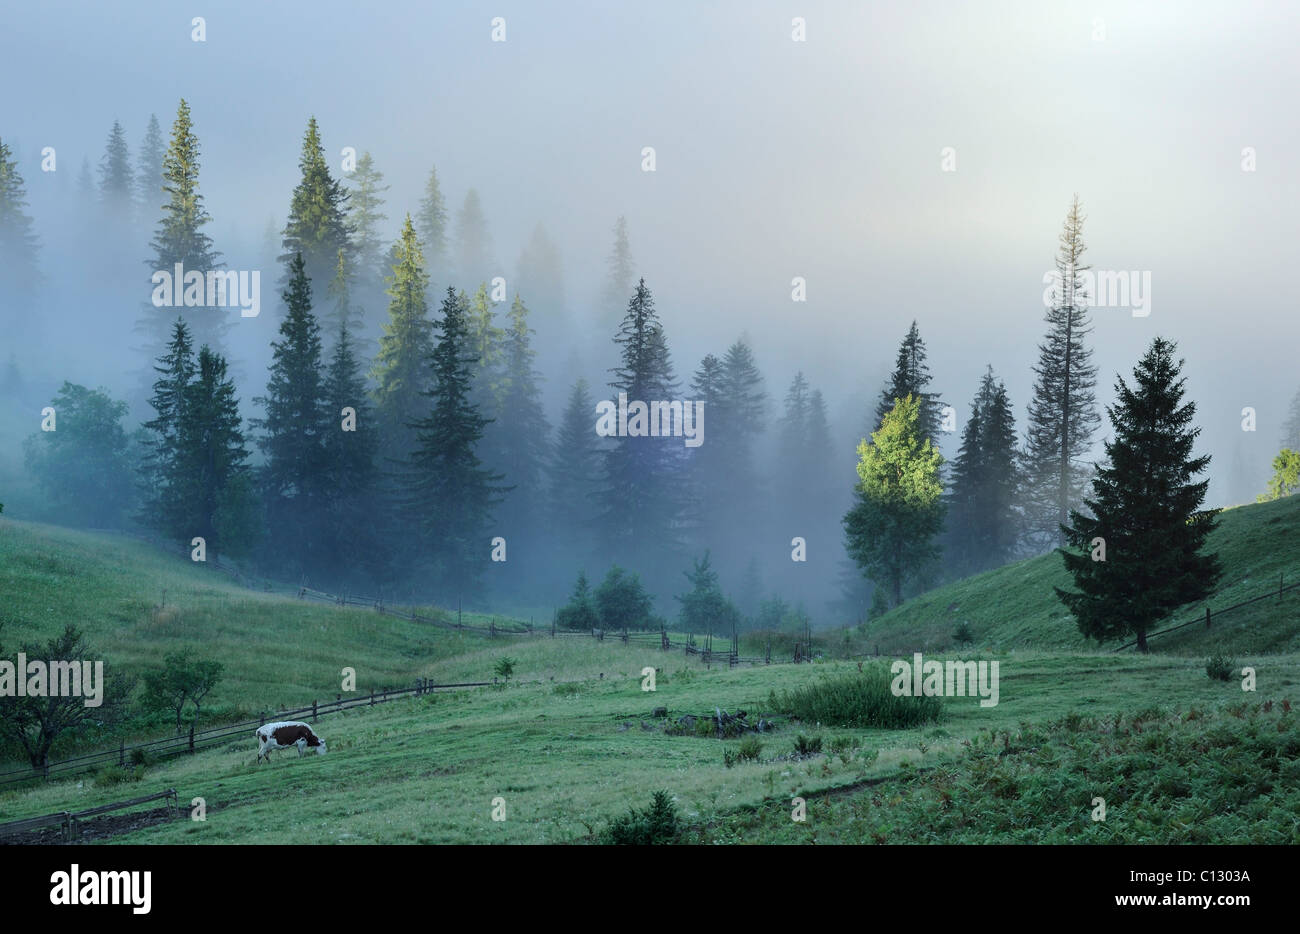 dzembronya landscape with cow on meadow Stock Photo